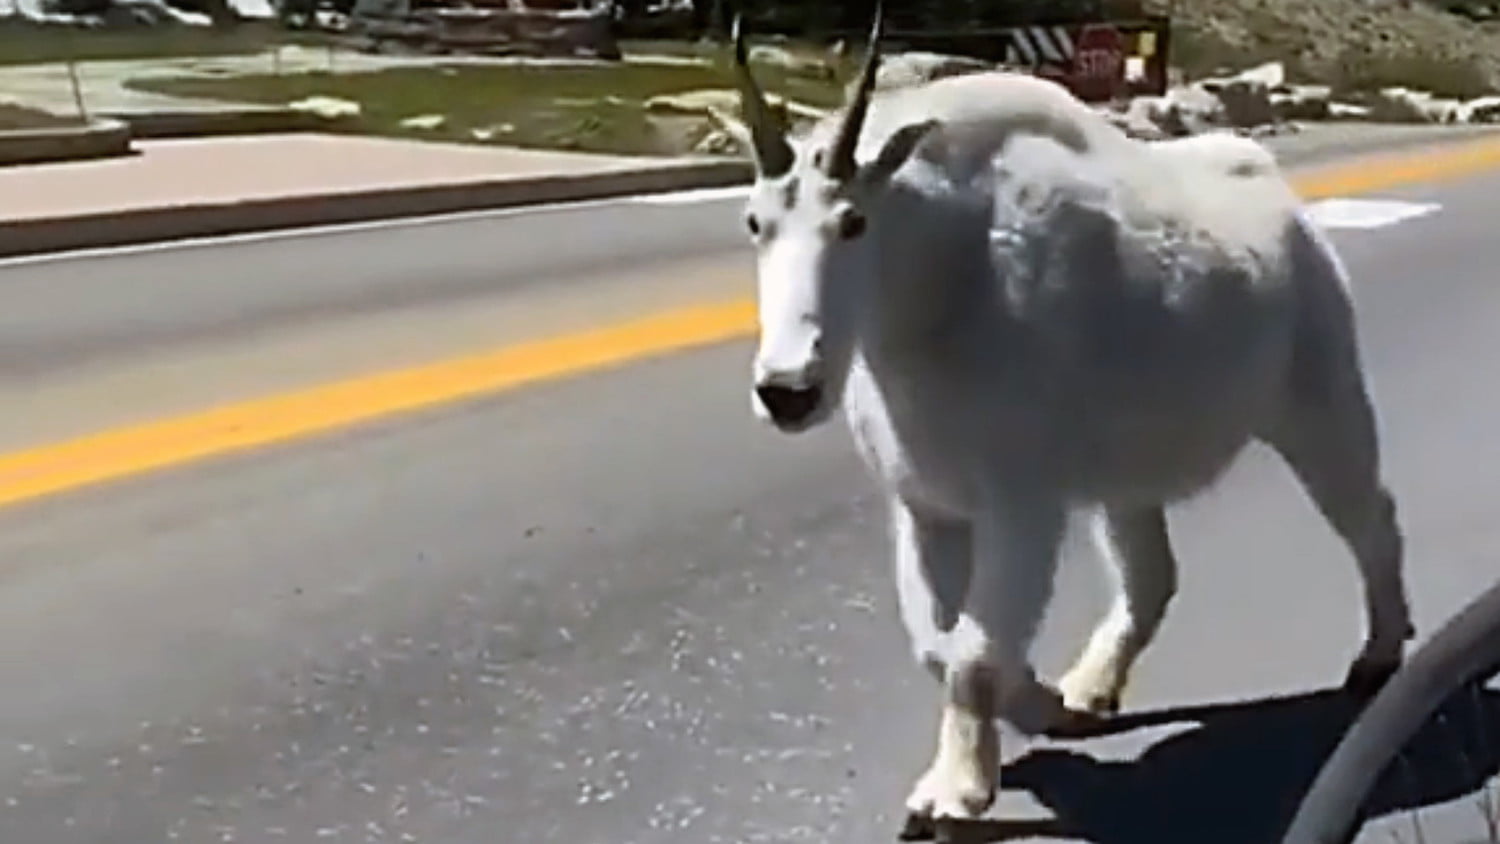 Netizens were struck by a giant goat caught in the mountains in the video